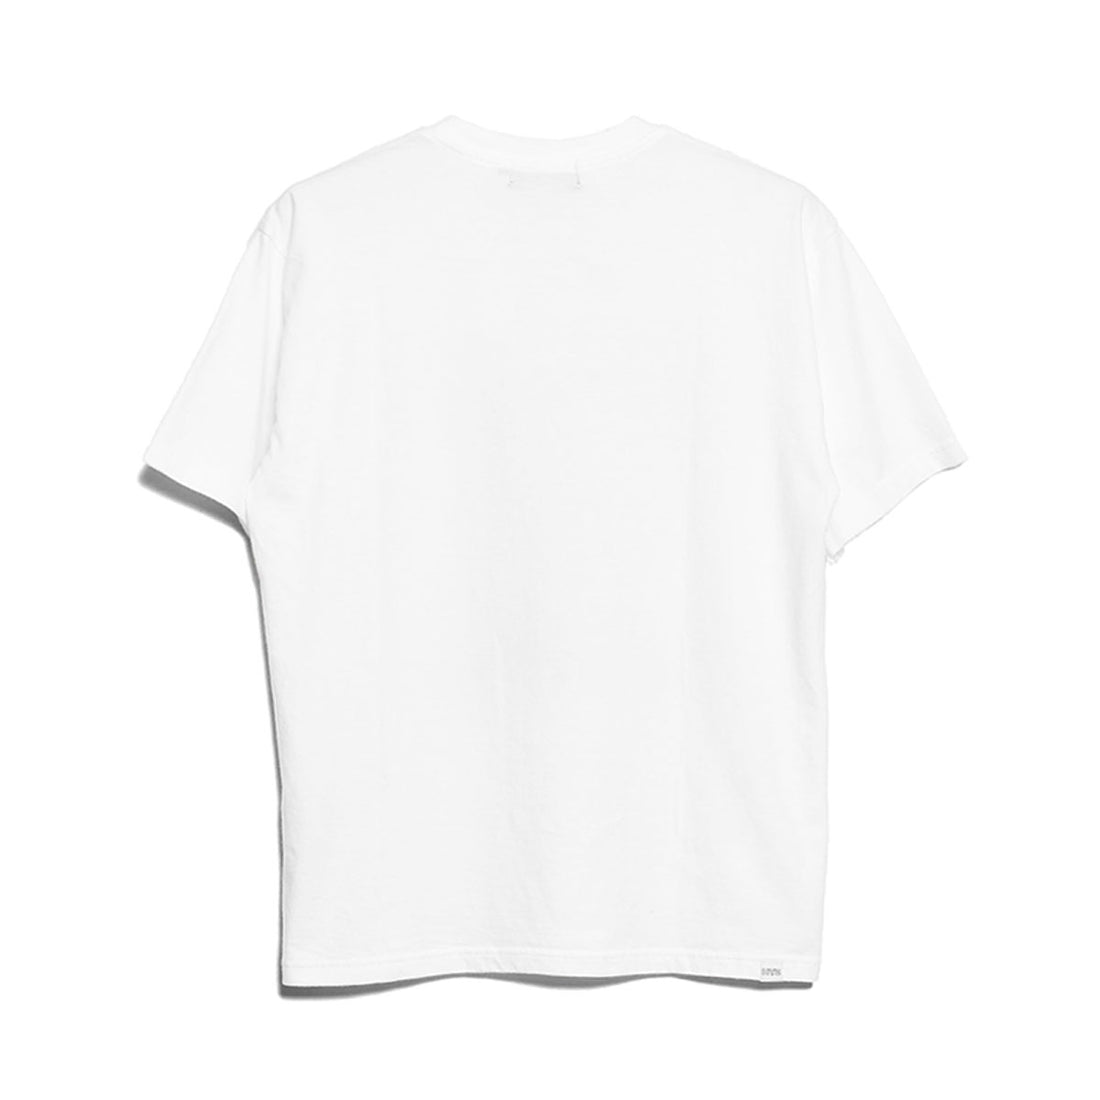 [HYSTERIC GLAMOUR]HYSTERIC RADIO Tシャツ/WHITE(02233CT03)